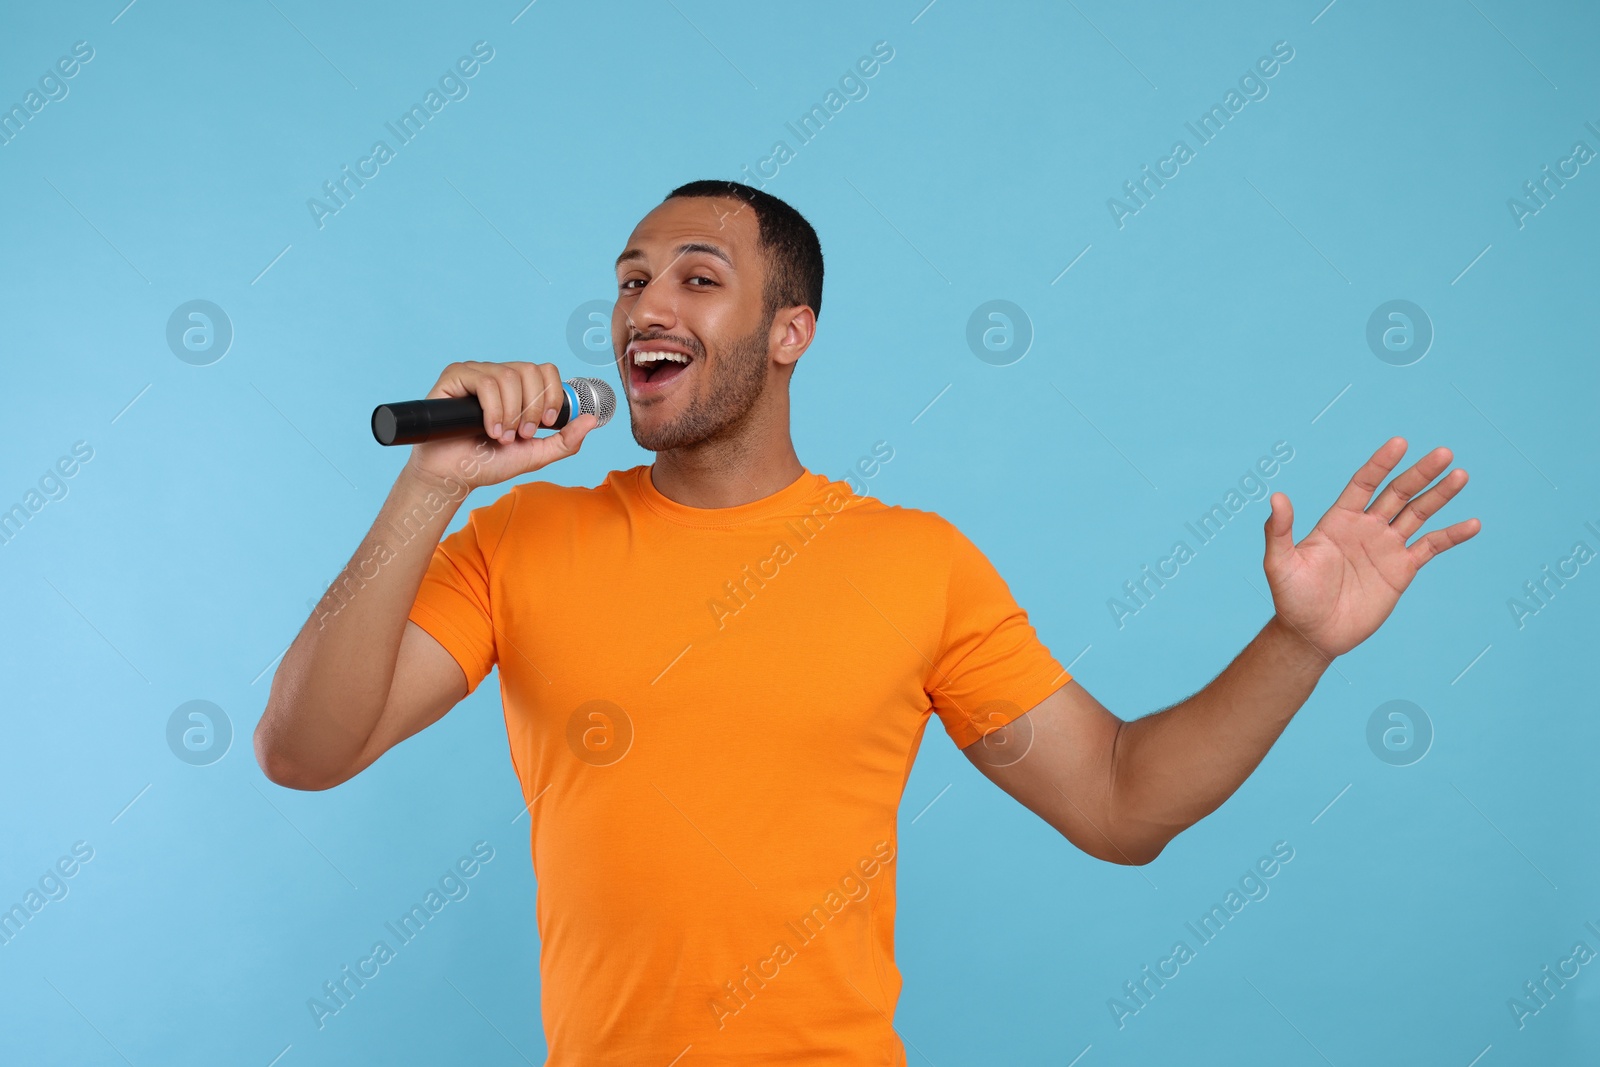 Photo of Handsome man with microphone singing on light blue background